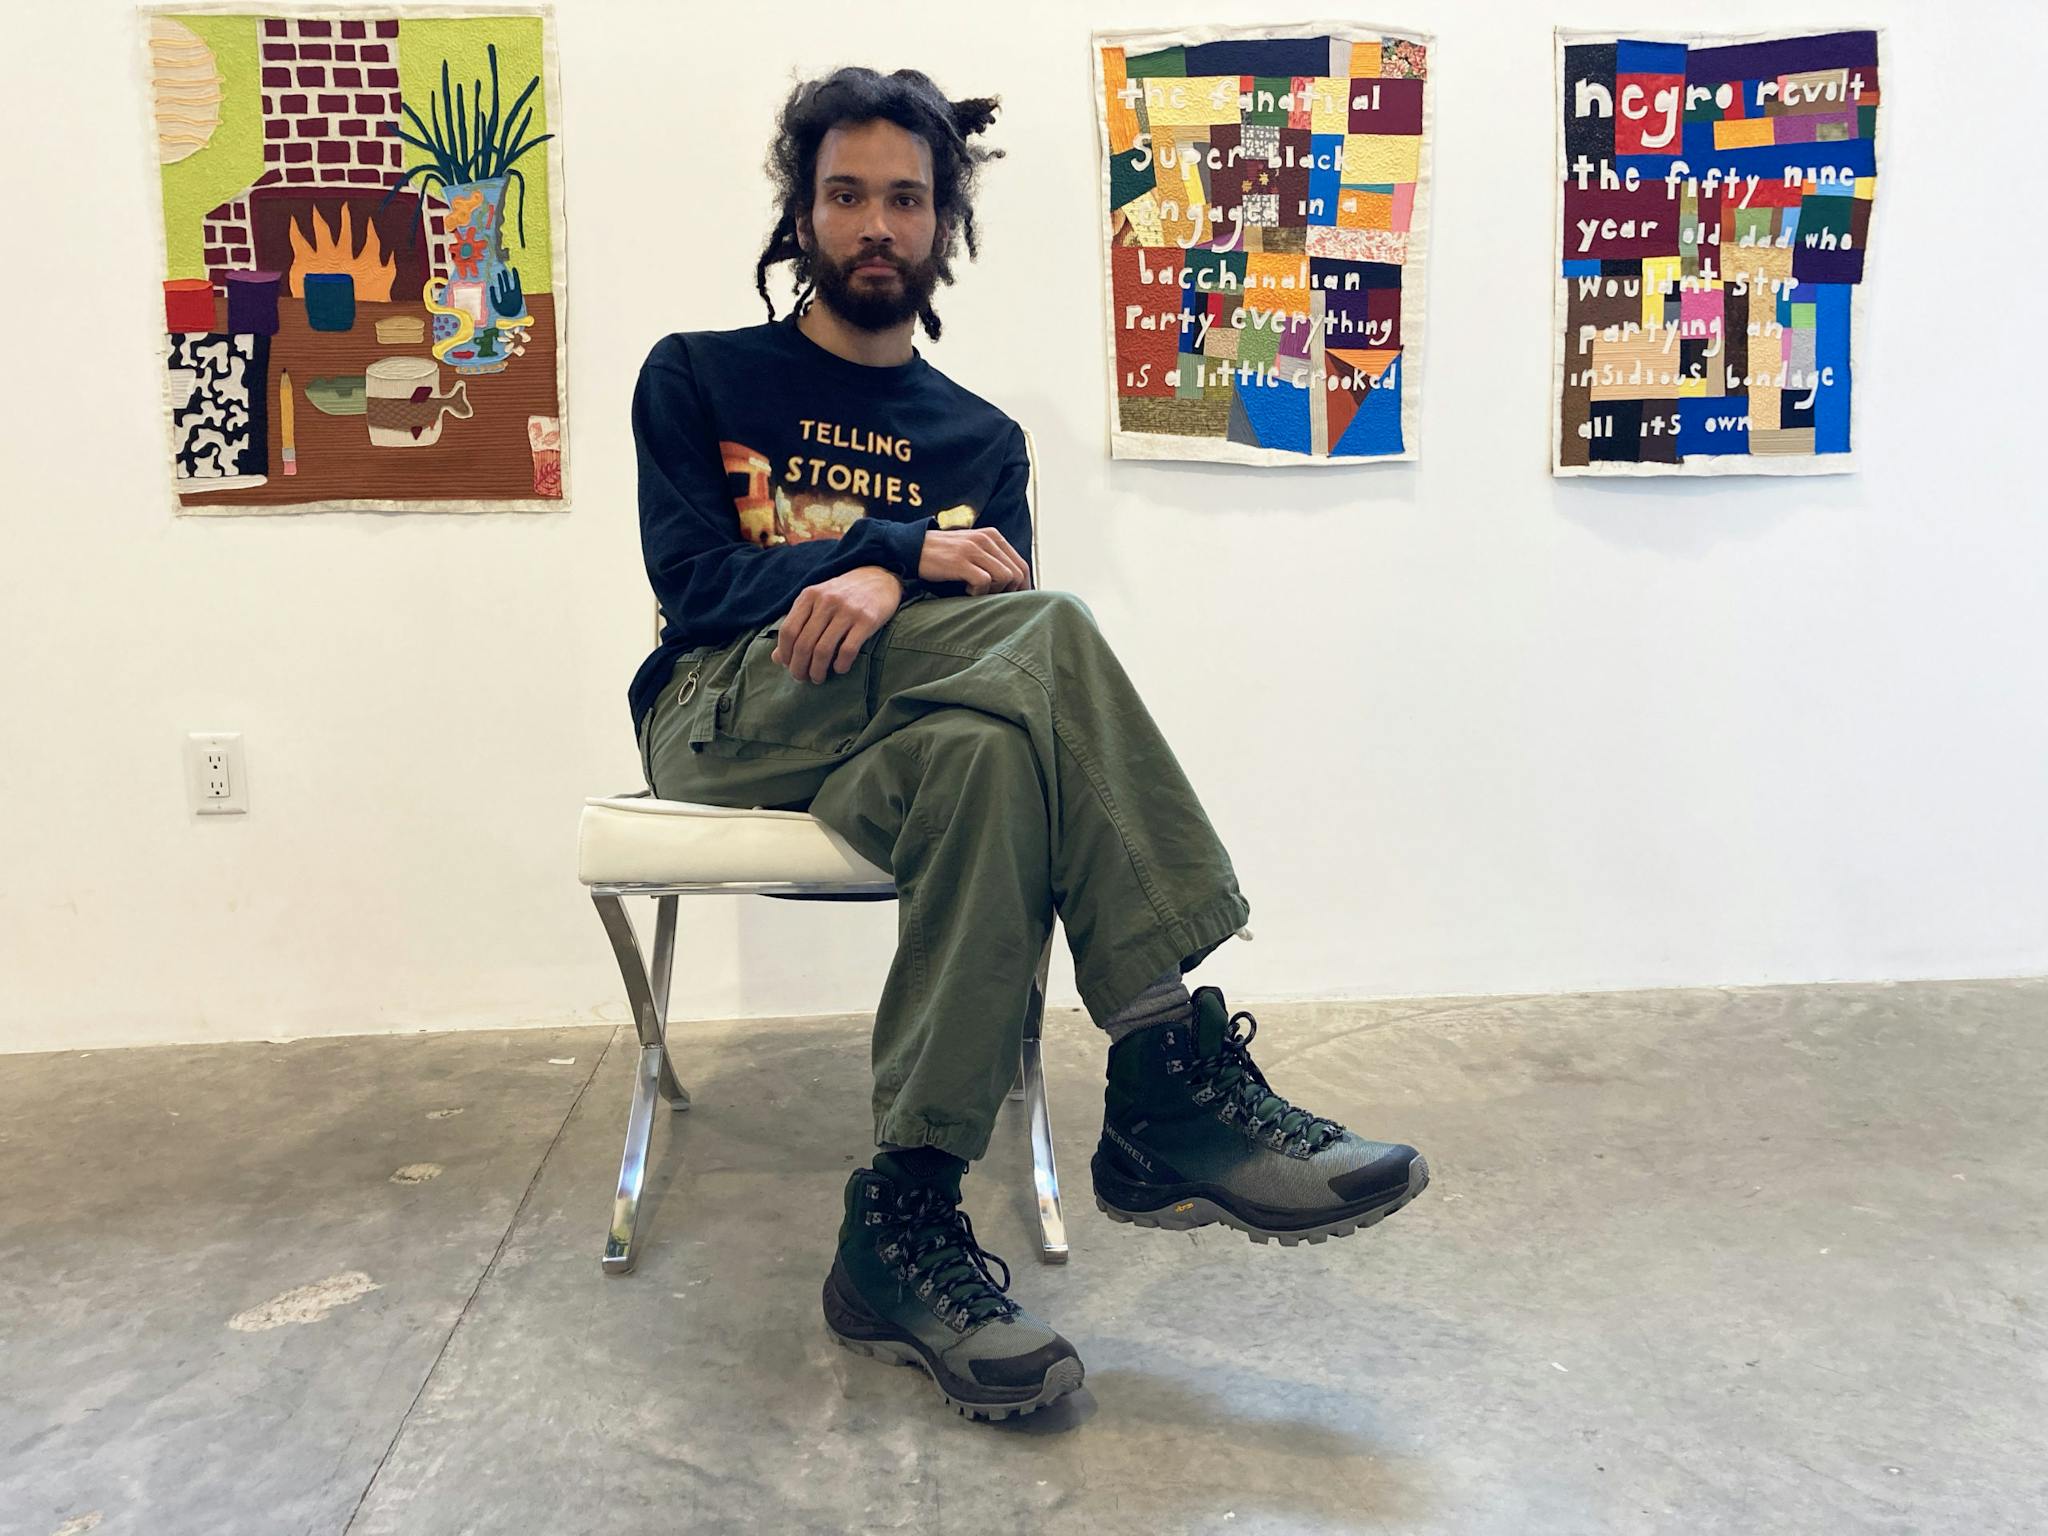 Michael C. Thorpe sits cross-legged in front of brightly colored quilted designs, hanging from the wall.